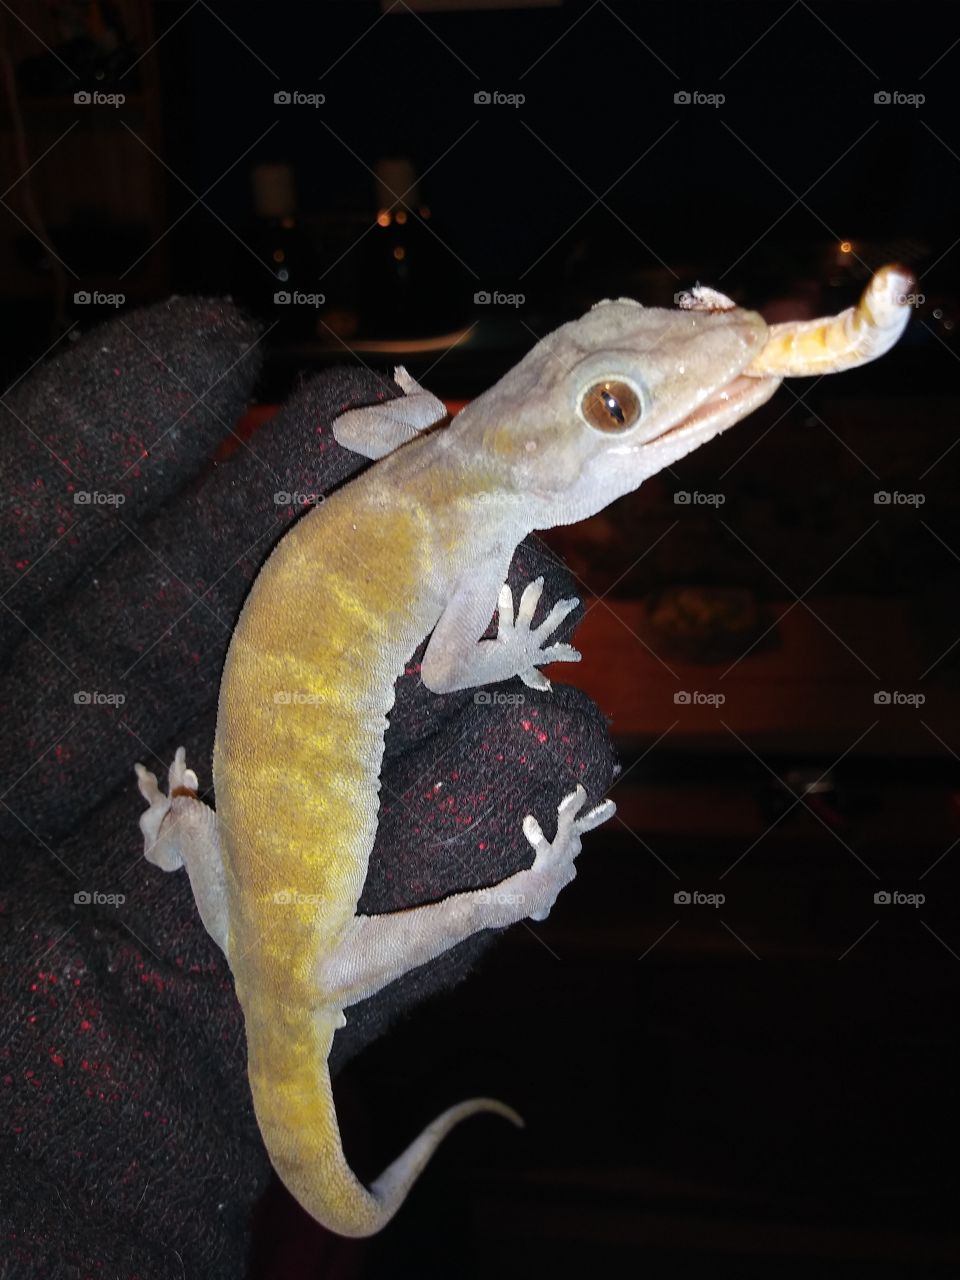 Live feeding my golden gecko. His bright yellow color is what makes this species so beautiful. Very temperamental and sometimes nippy by nature but sweet pets.